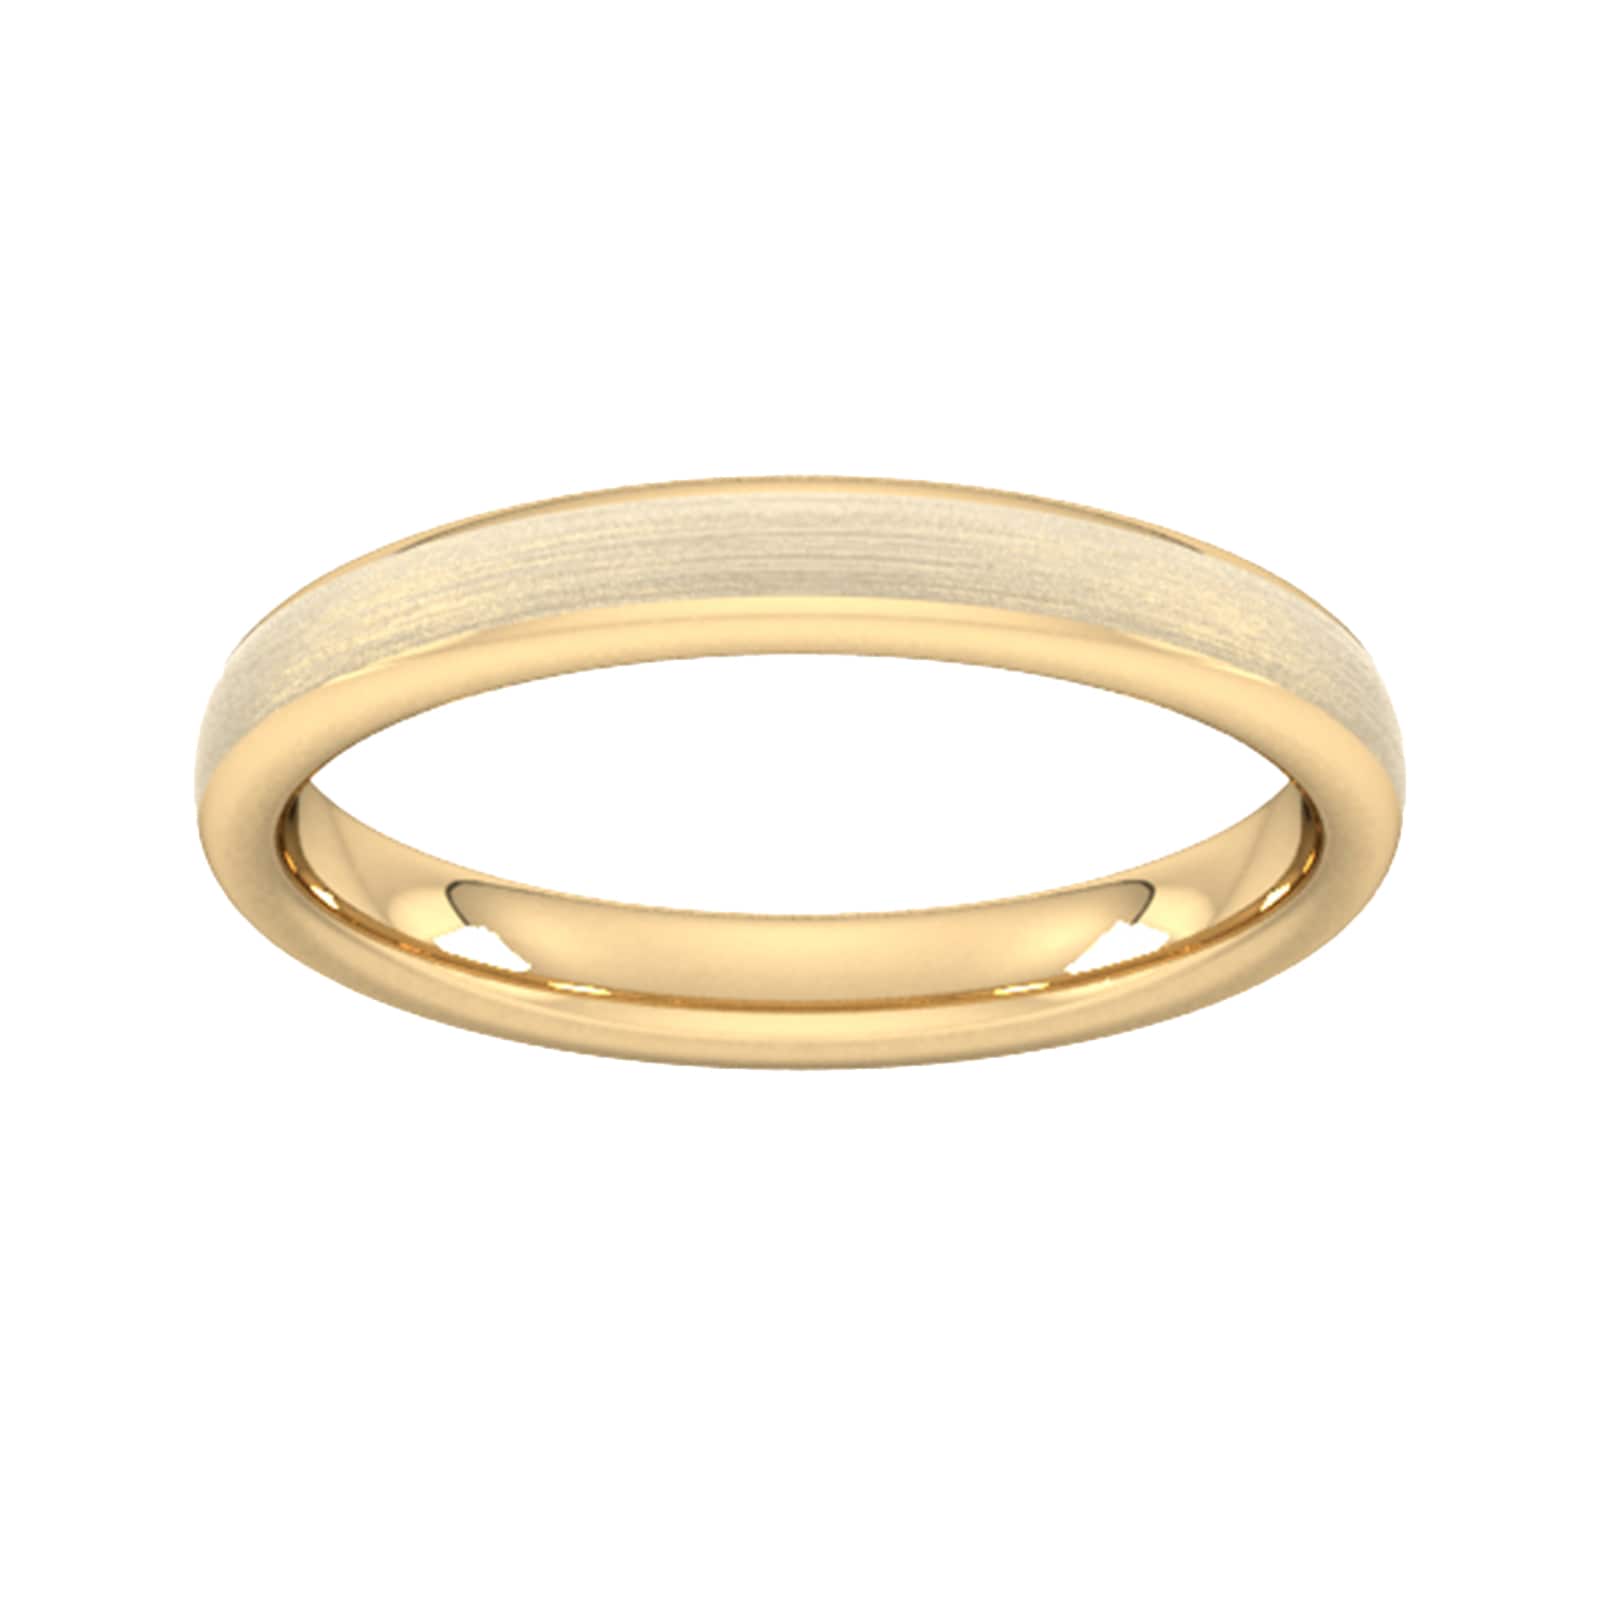 3mm Traditional Court Heavy Matt Finished Wedding Ring In 18 Carat Yellow Gold - Ring Size N